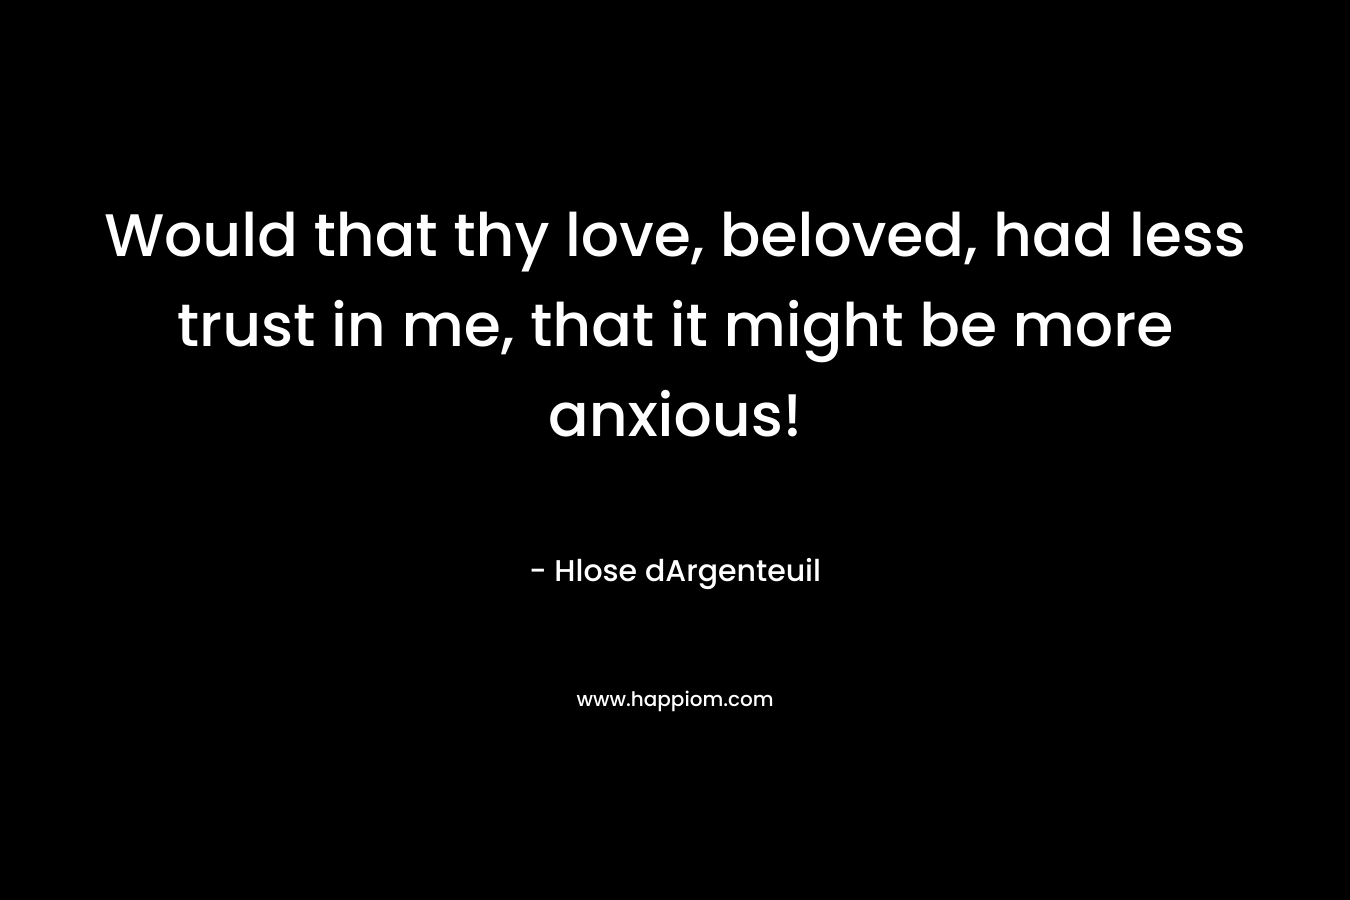 Would that thy love, beloved, had less trust in me, that it might be more anxious!